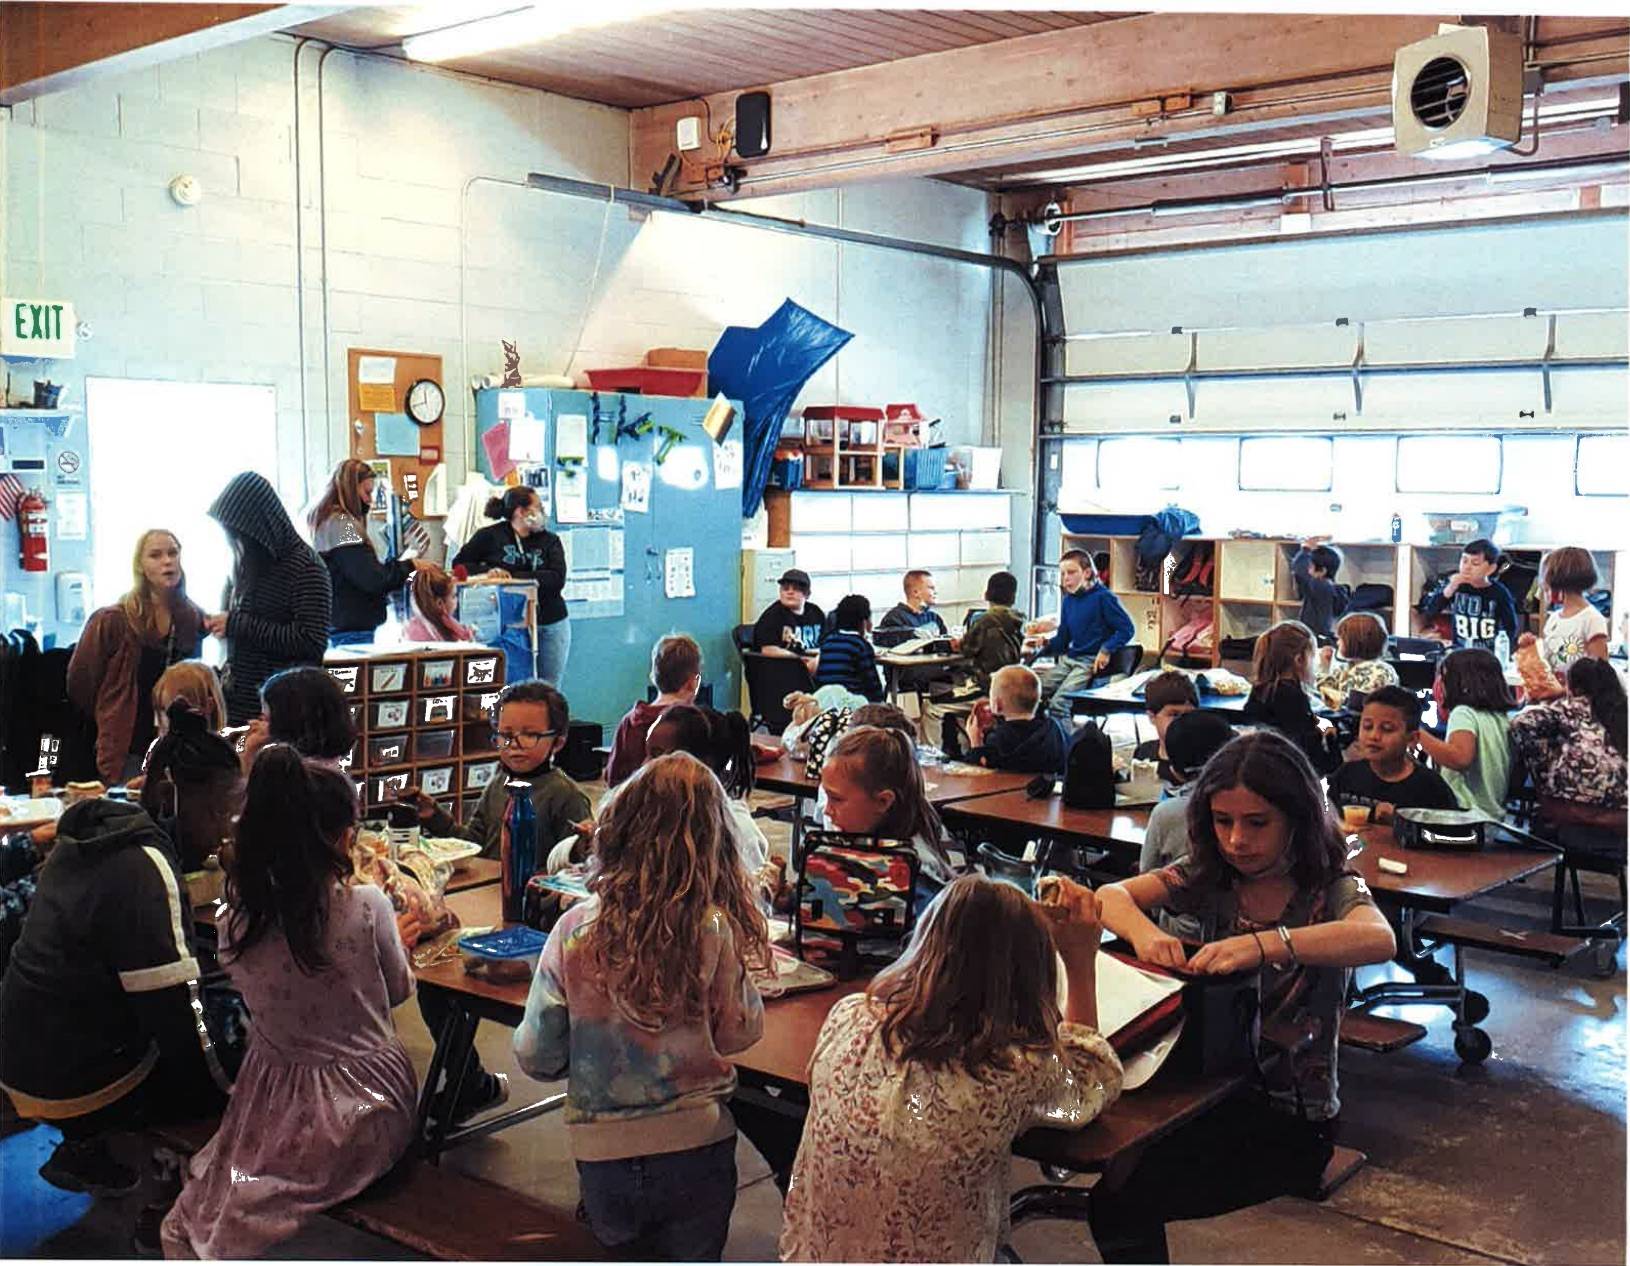 Boys and Girls Club members are crowded in their current space at the old Coupeville fire station. (Photo courtesy of the Boys and Girls Club)